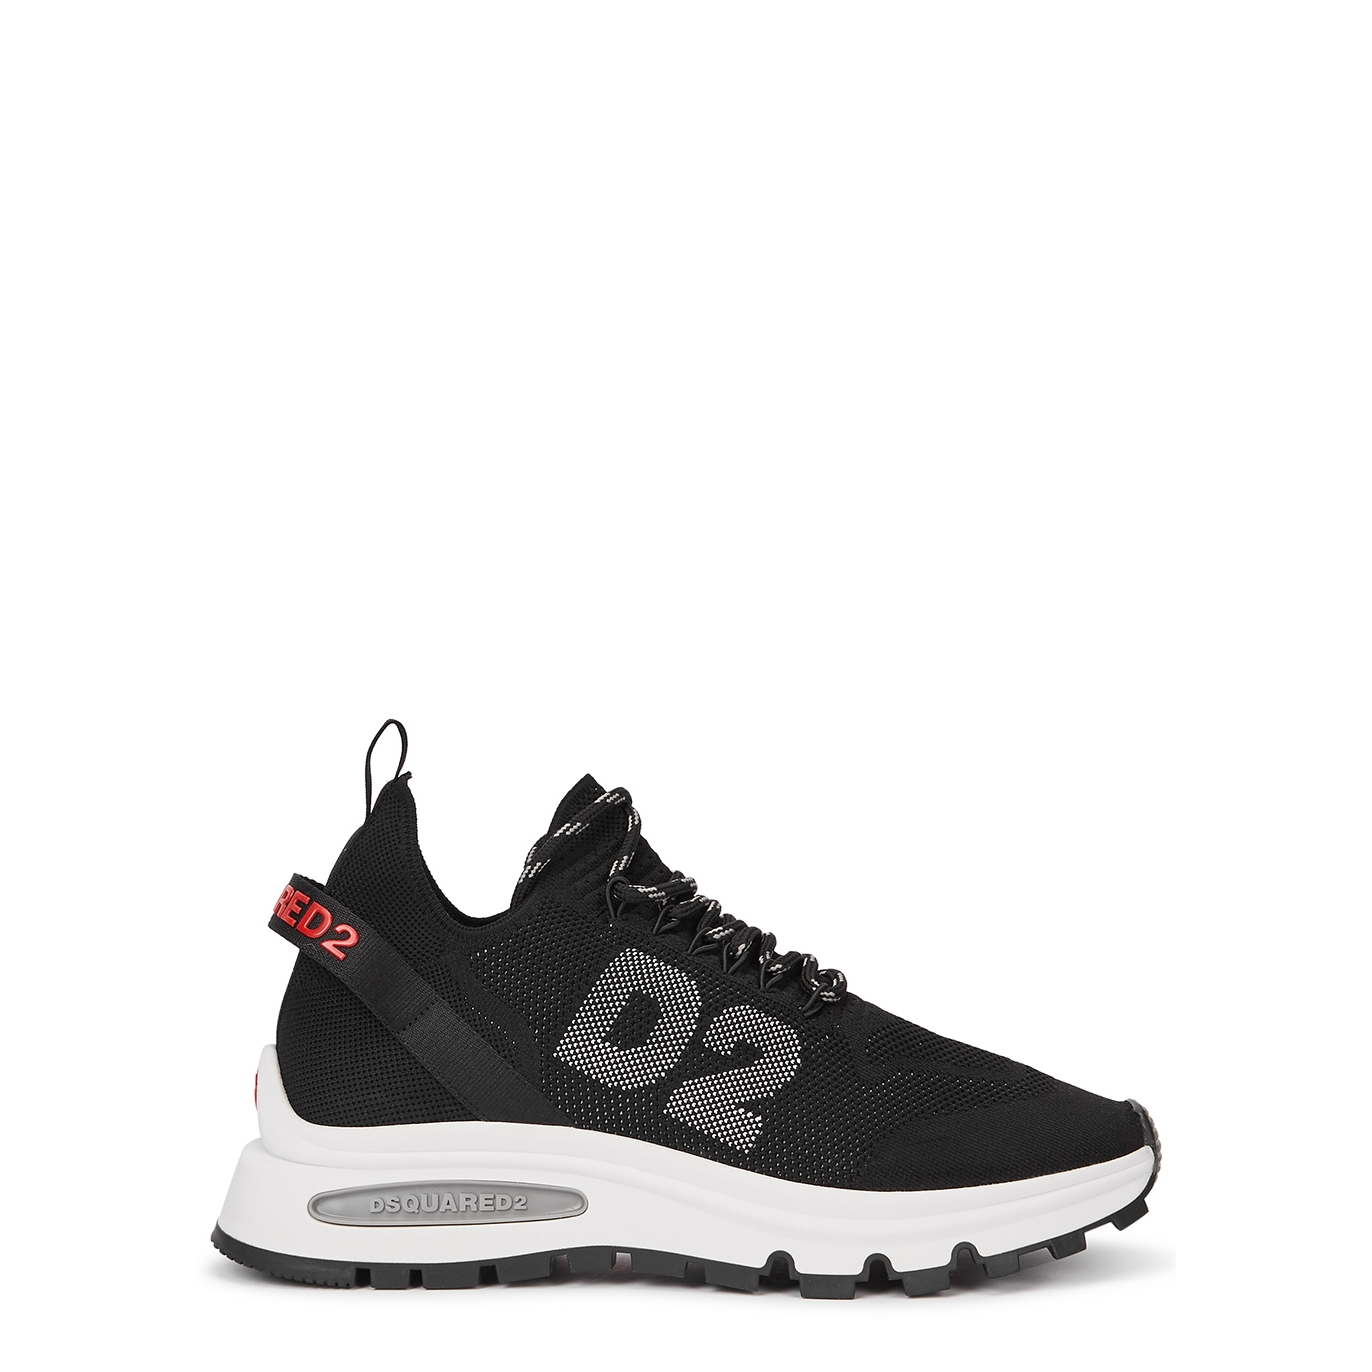 Dsquared2 Run DS2 Black Stretch-knit Sneakers - 9